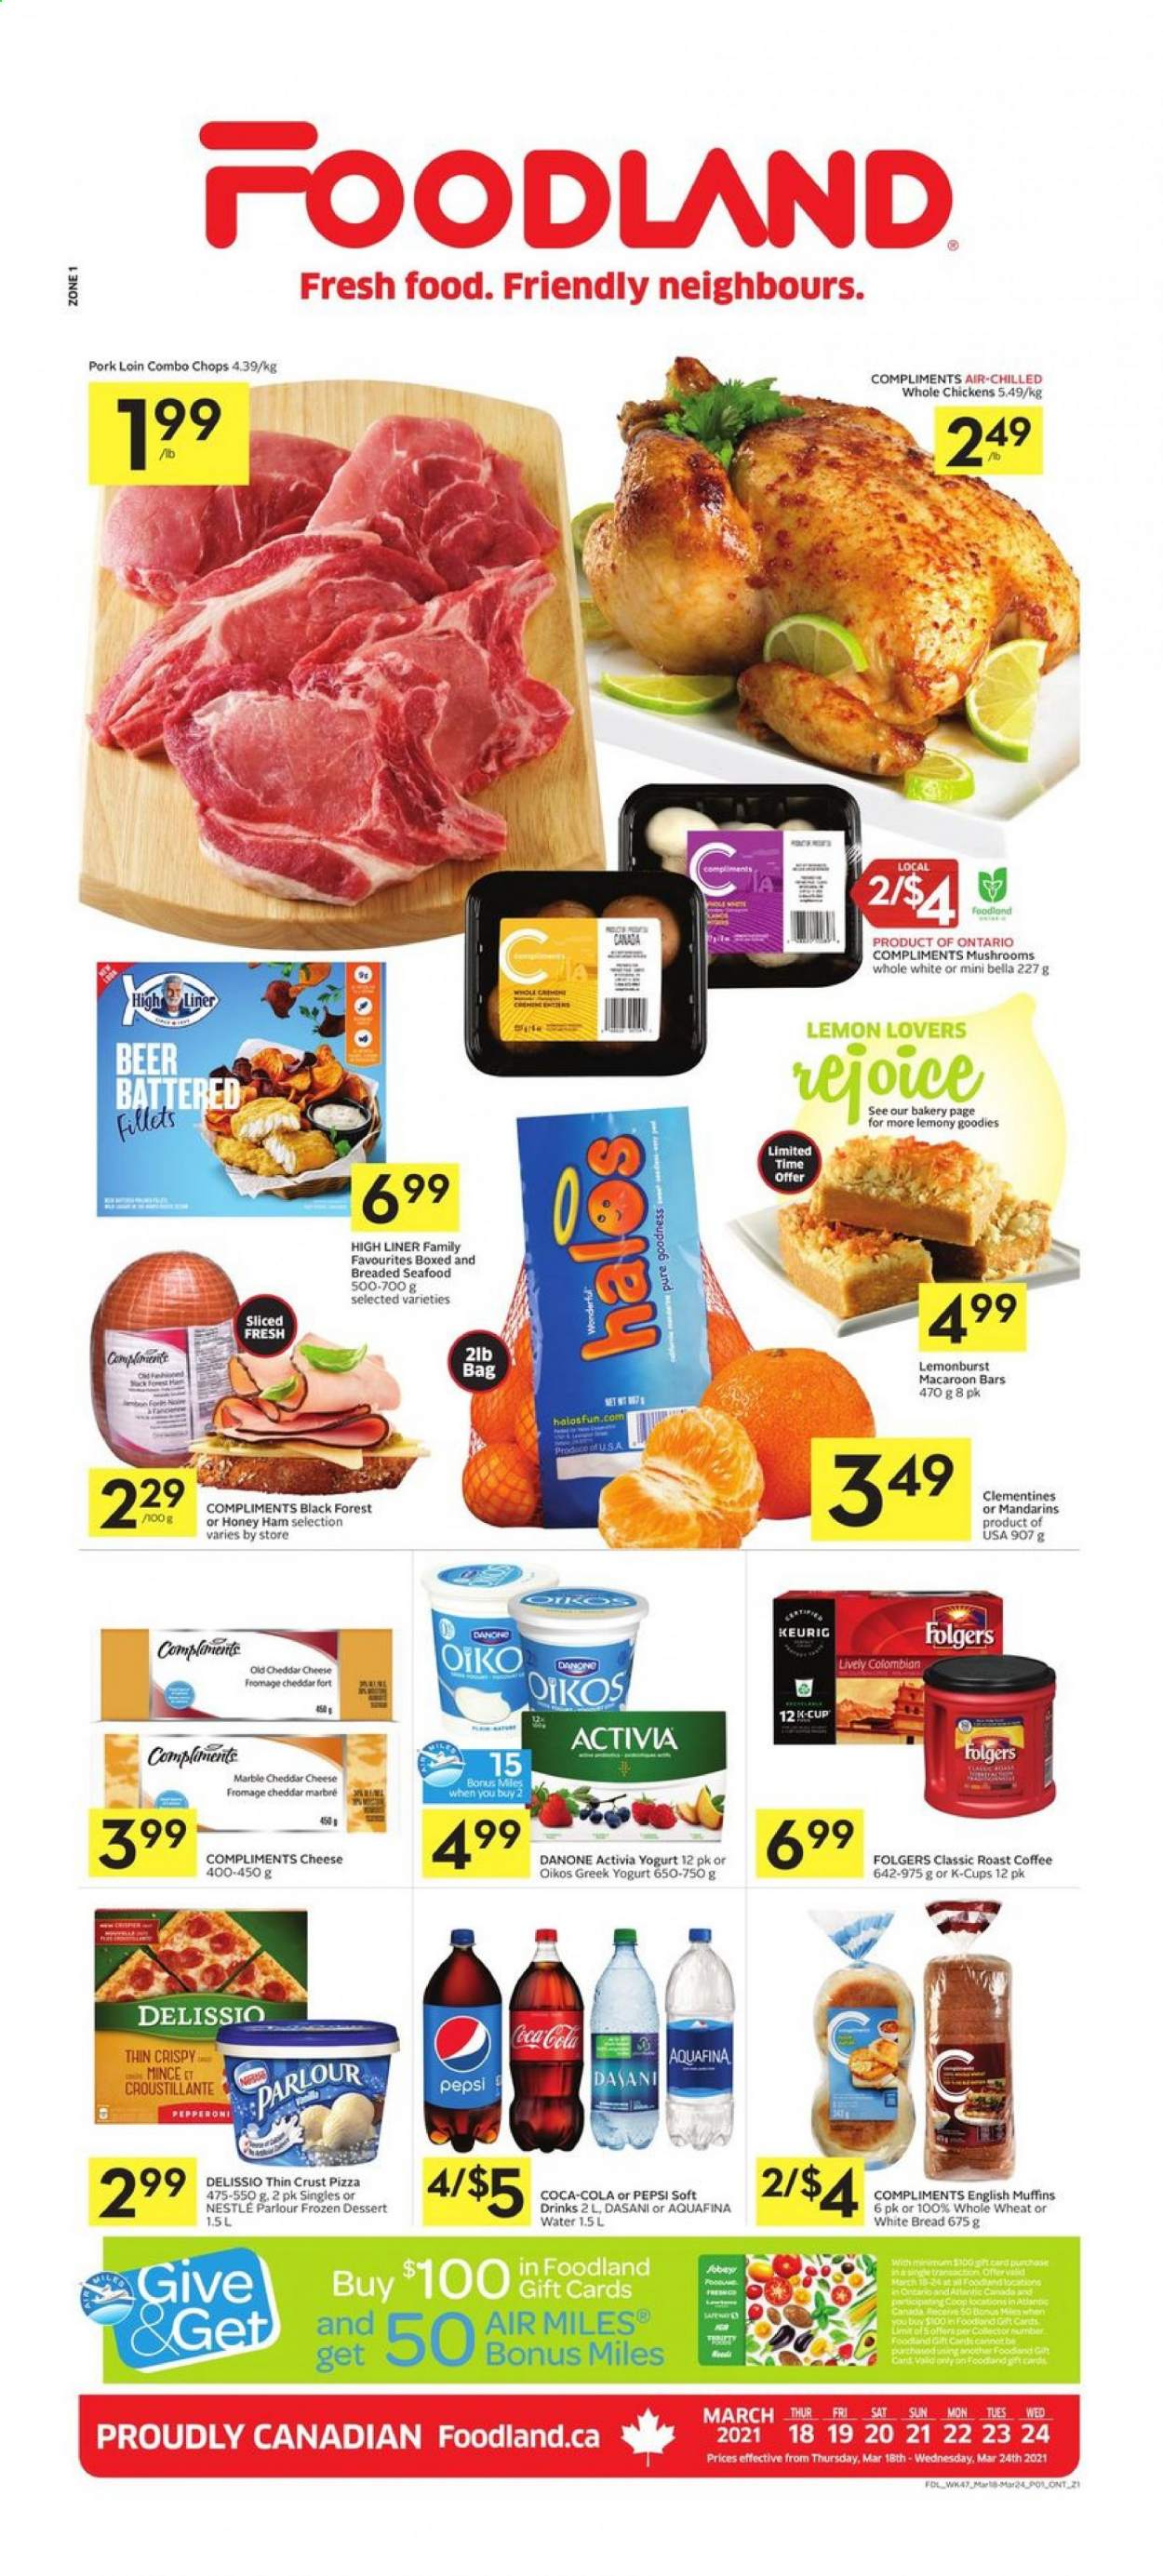 thumbnail - Foodland Flyer - March 18, 2021 - March 24, 2021 - Sales products - bread, english muffins, white bread, clementines, mandarines, seafood, pizza, ham, cheddar, greek yoghurt, yoghurt, Activia, Oikos, Coca-Cola, Pepsi, soft drink, Aquafina, coffee, Folgers, coffee capsules, K-Cups, Keurig, beer, whole chicken, pork loin, pork meat, Danone, Nestlé. Page 1.